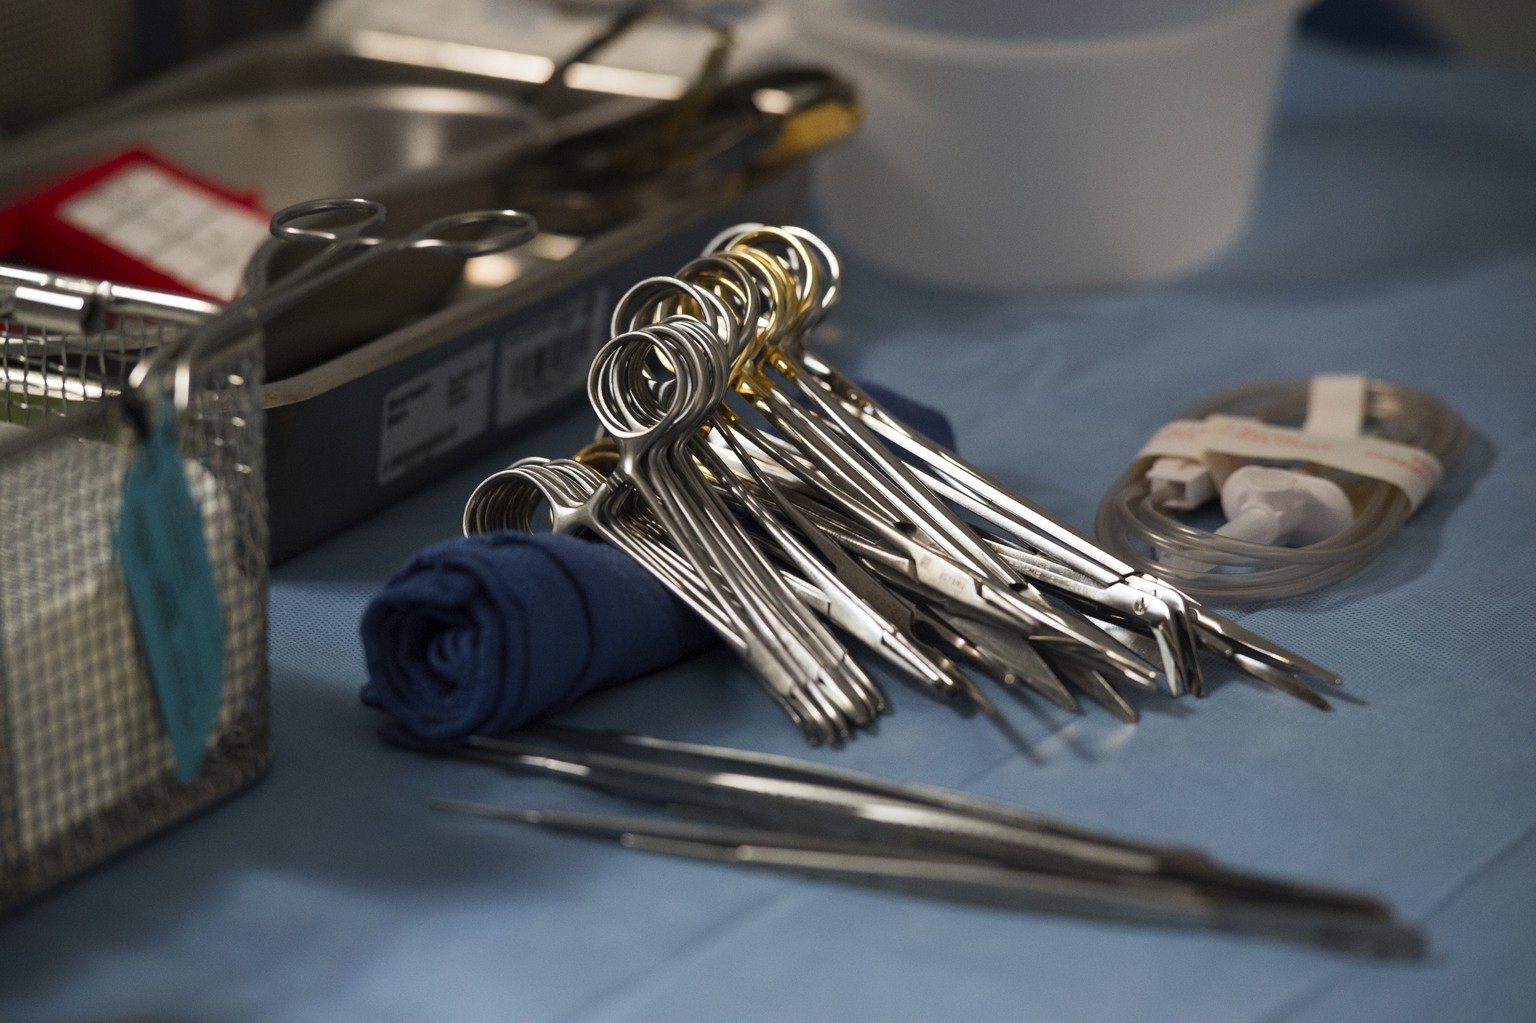 FILE - Surgical instruments and supplies lay on a table during a kidney transplant surgery at MedStar Georgetown University Hospital in Washington D.C., Tuesday, June 28, 2016. The Biden administratio ...